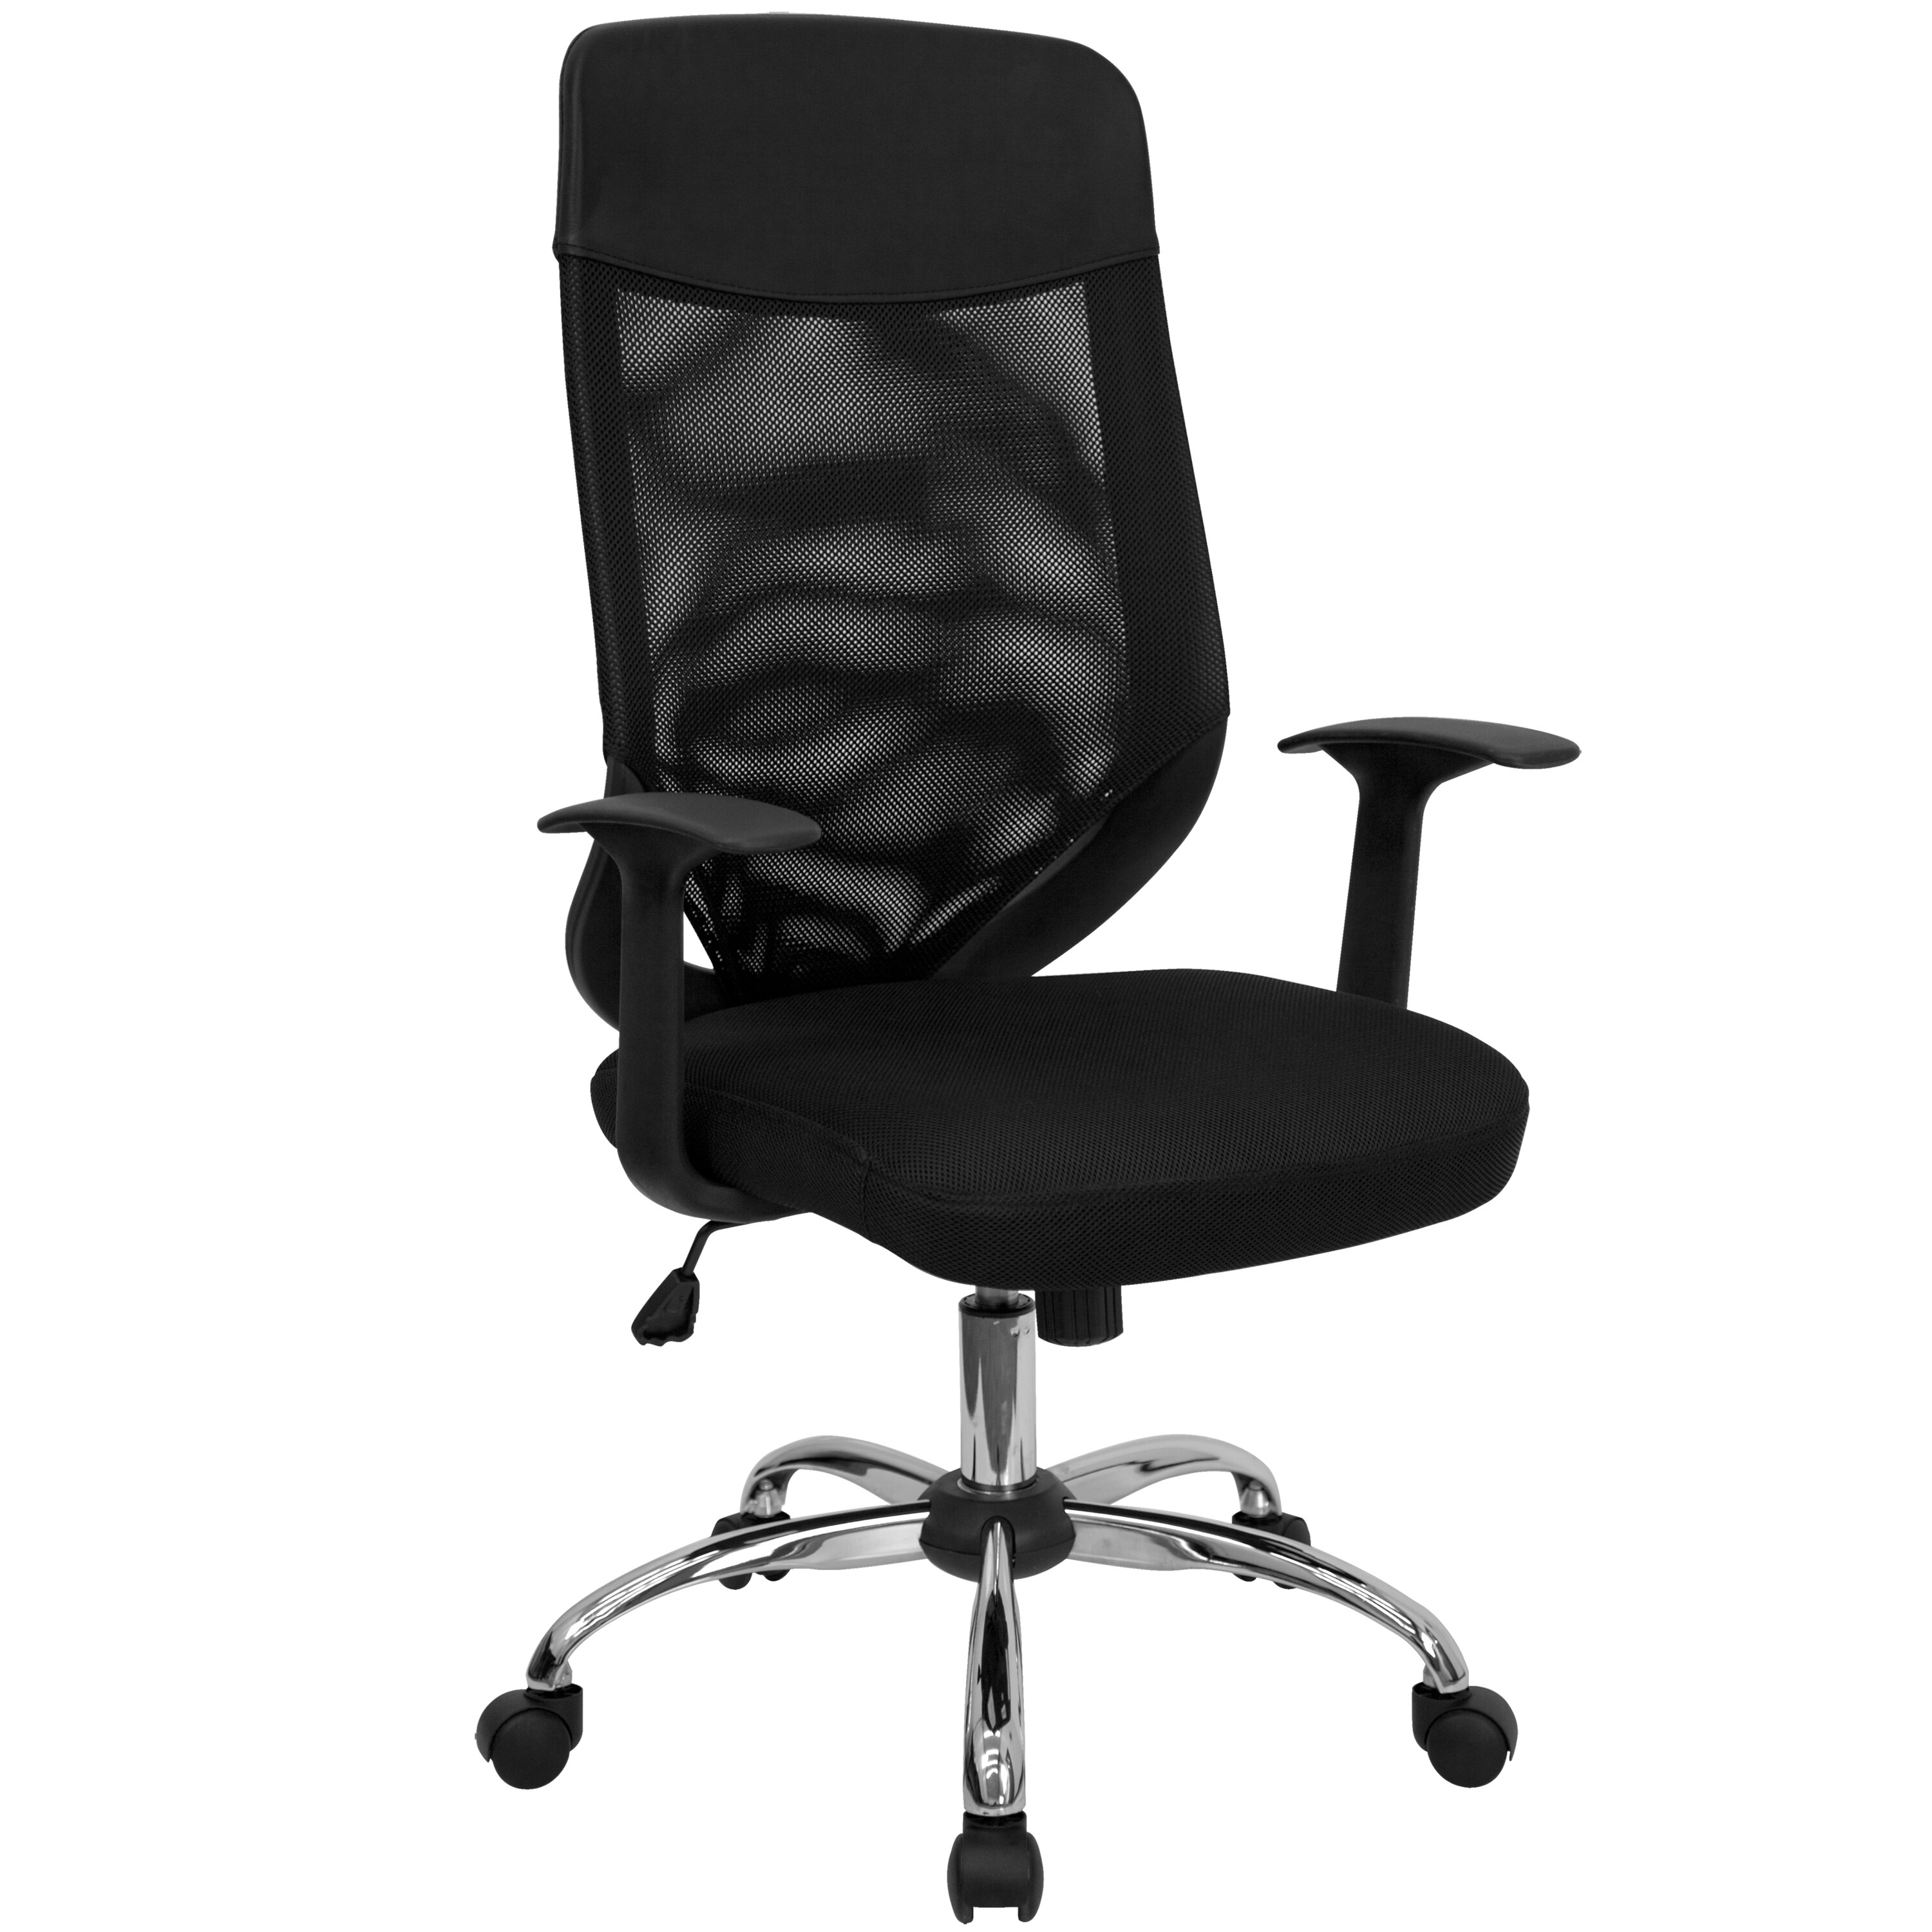 Elly Black Mesh Executive Swivel Adjustable Office Chair with Mesh Padded Seat and Nylon Headrest